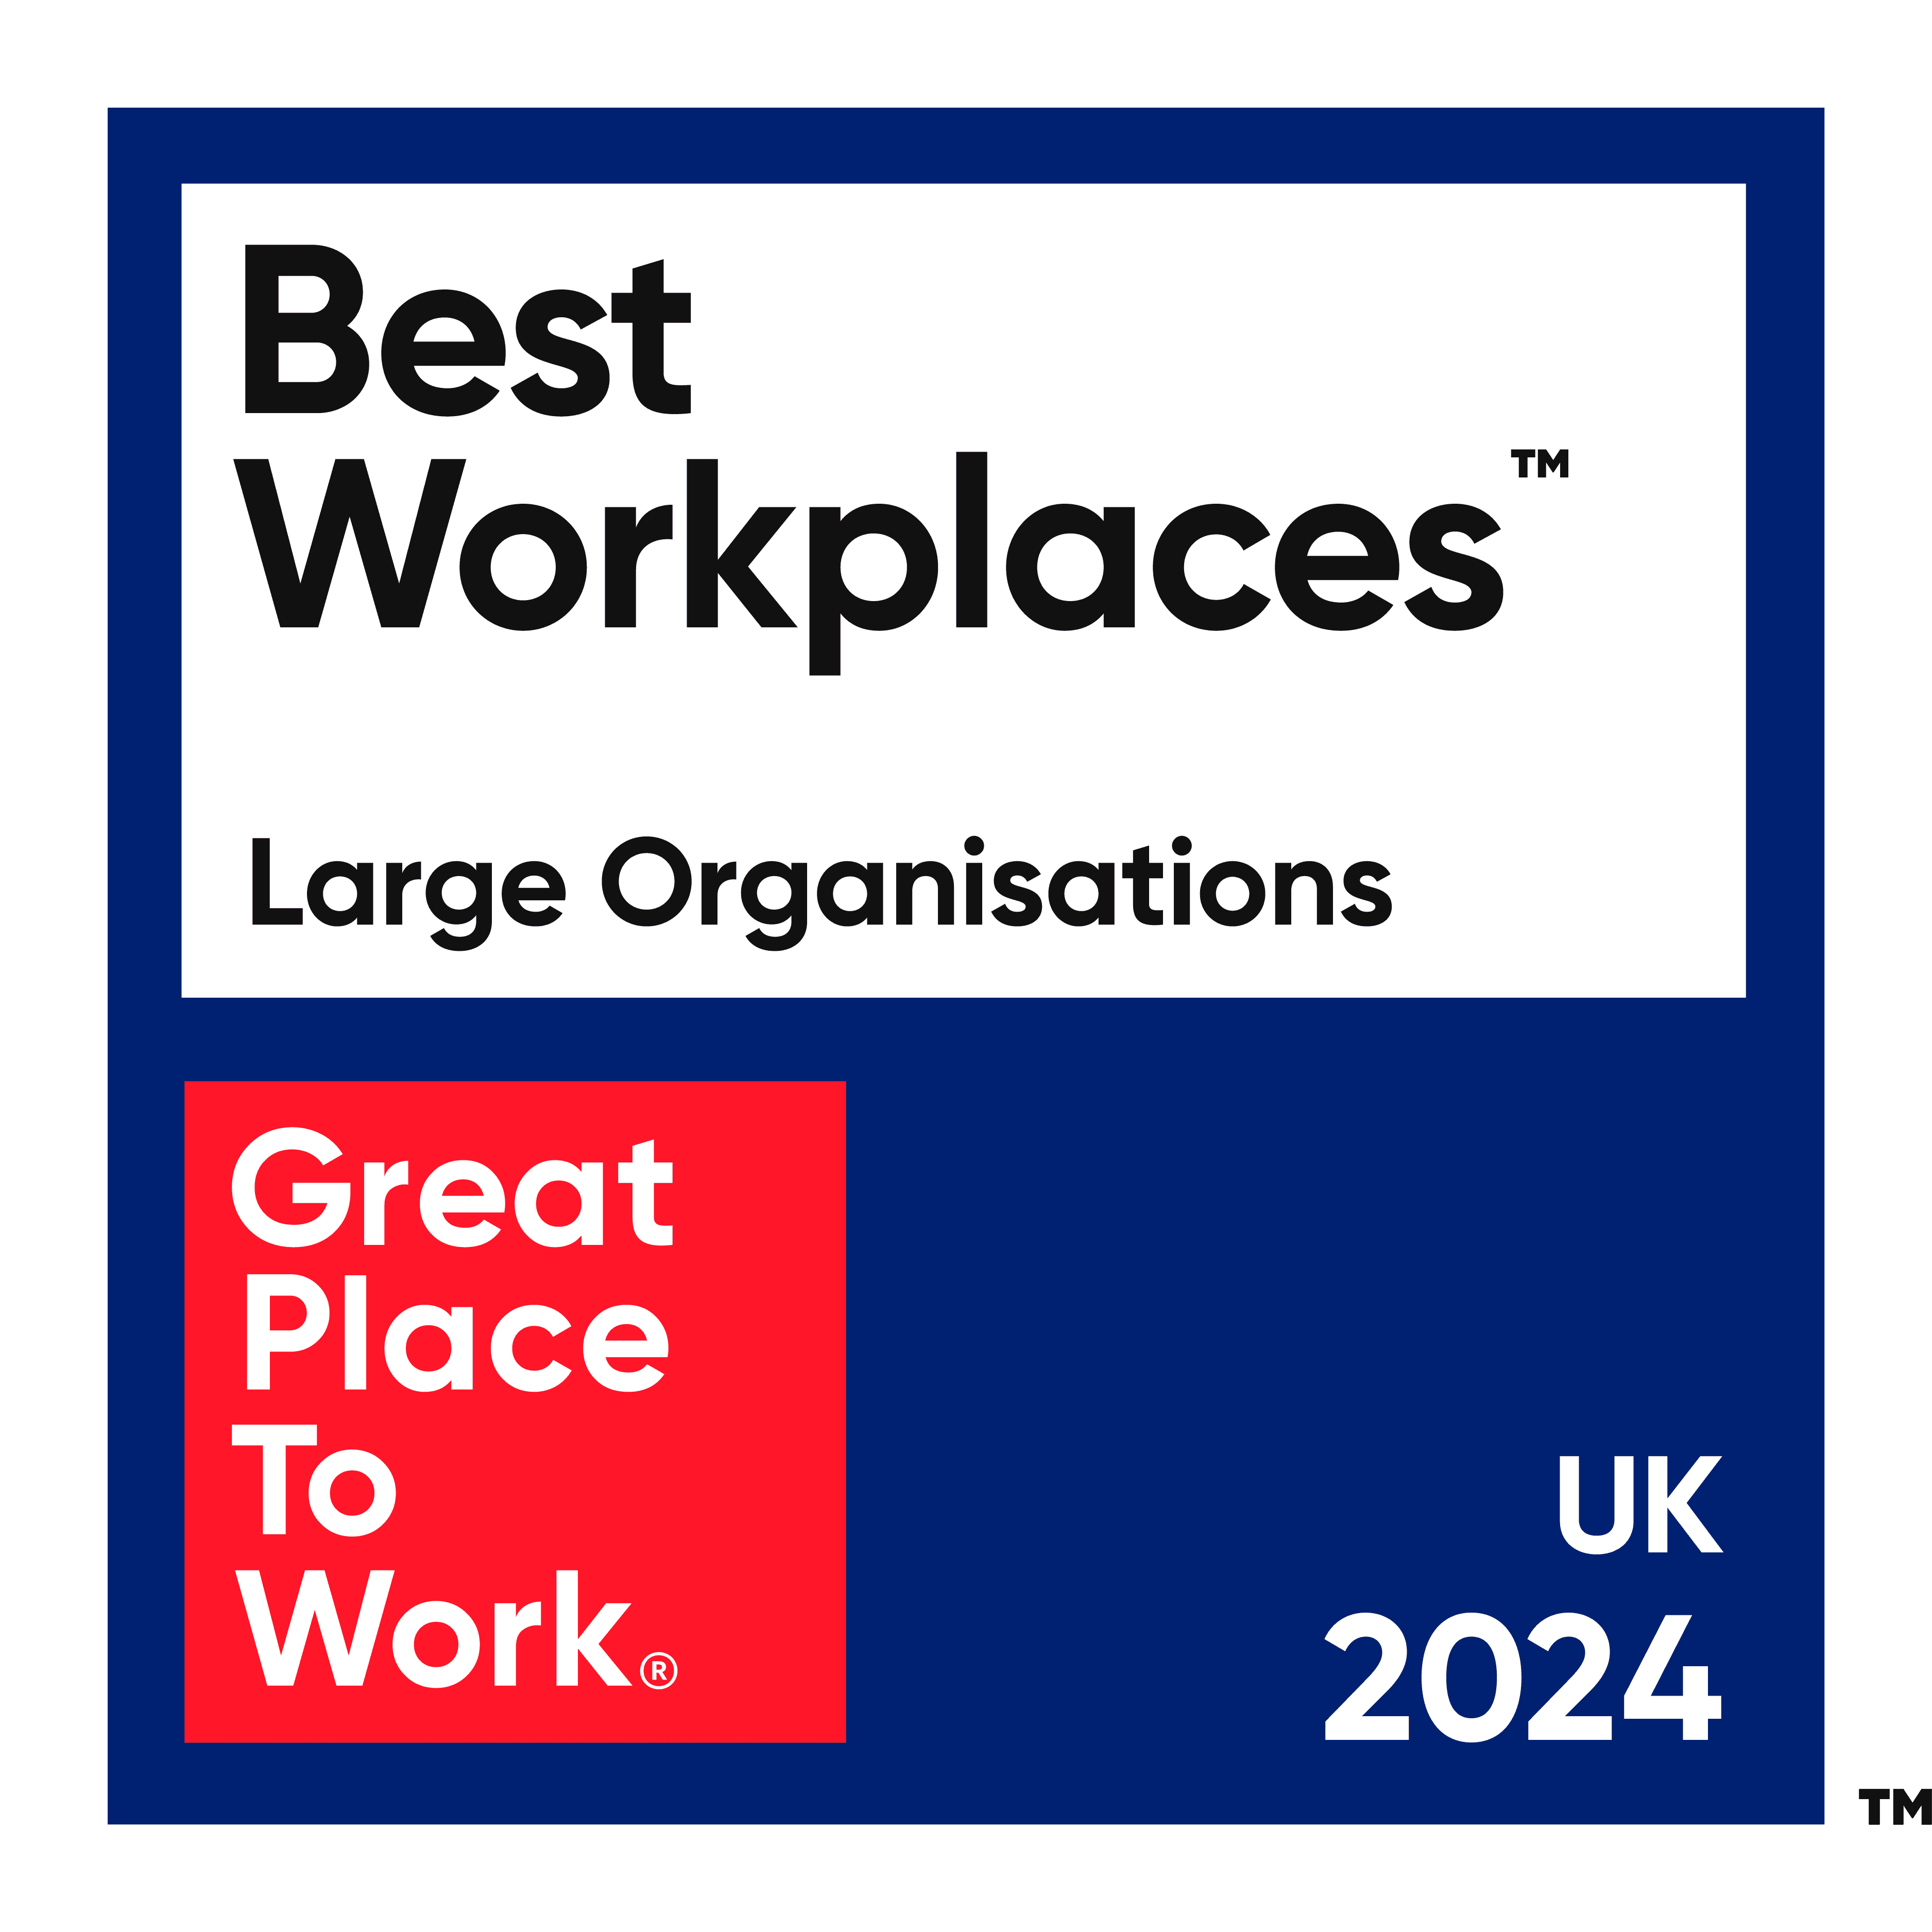 Best Workplaces UK 2024